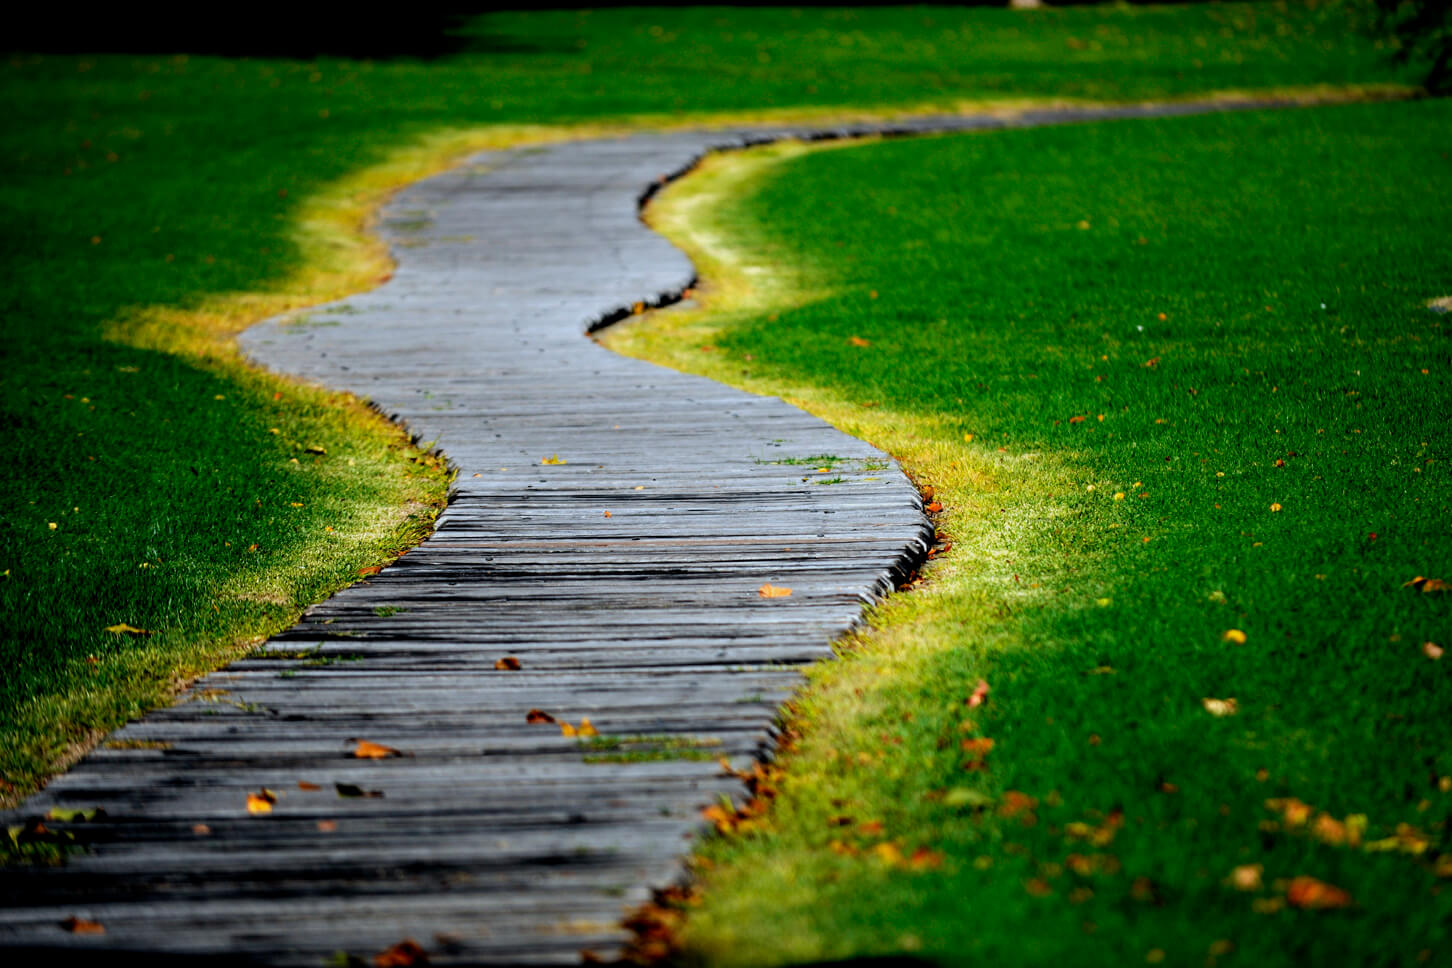 Stirk Park - view of wooden path